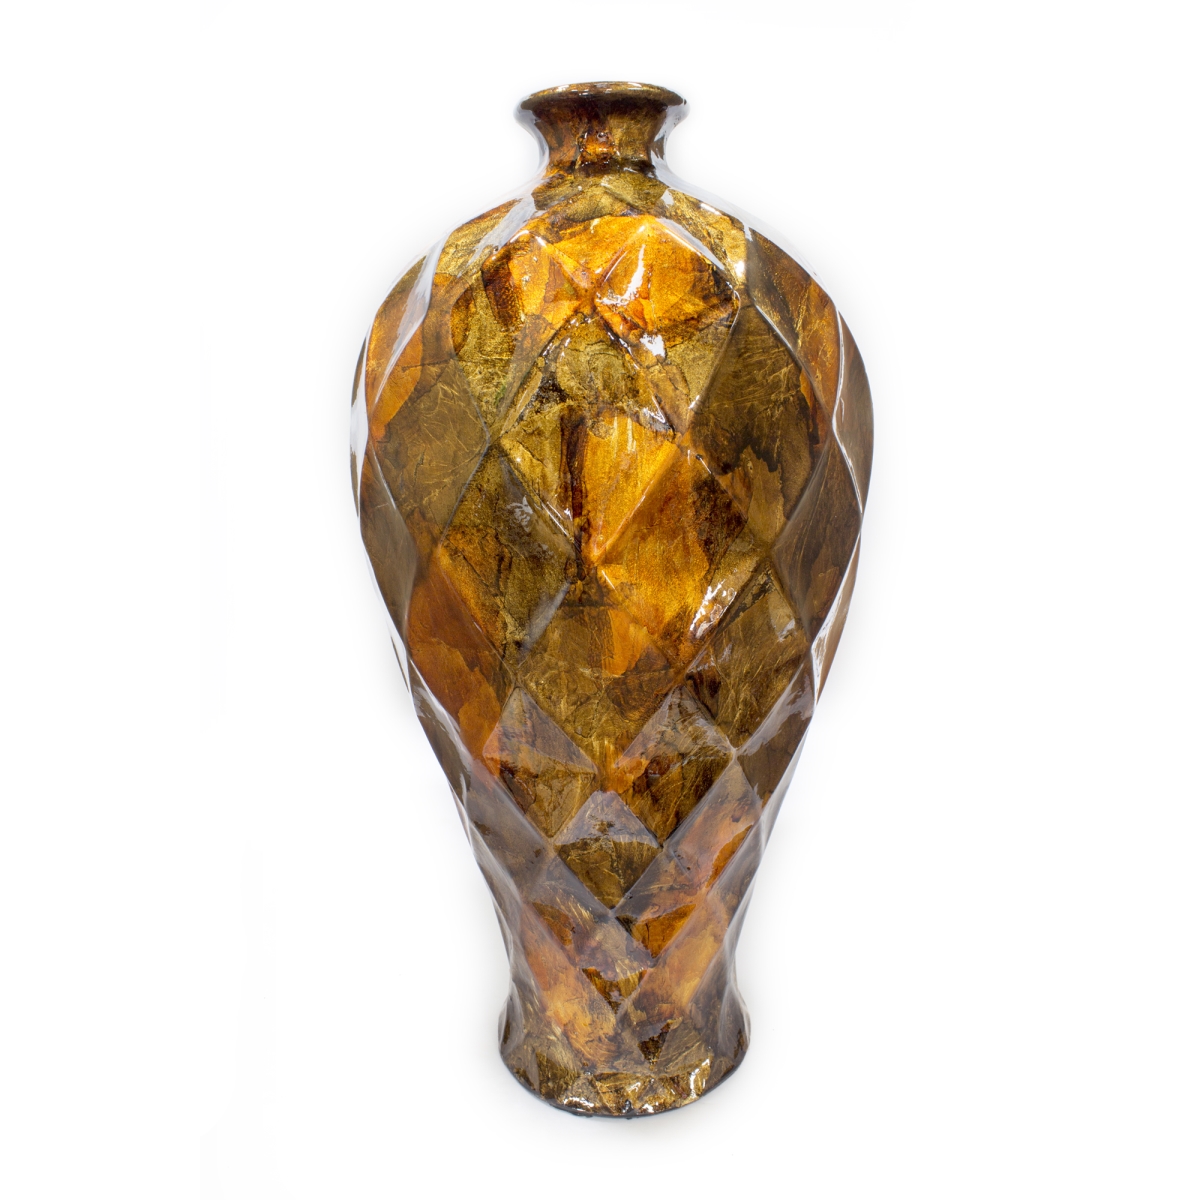 W1273-03 20 In. Tinsley Foiled & Lacquered Floor Vase - Gold, Copper & Brown